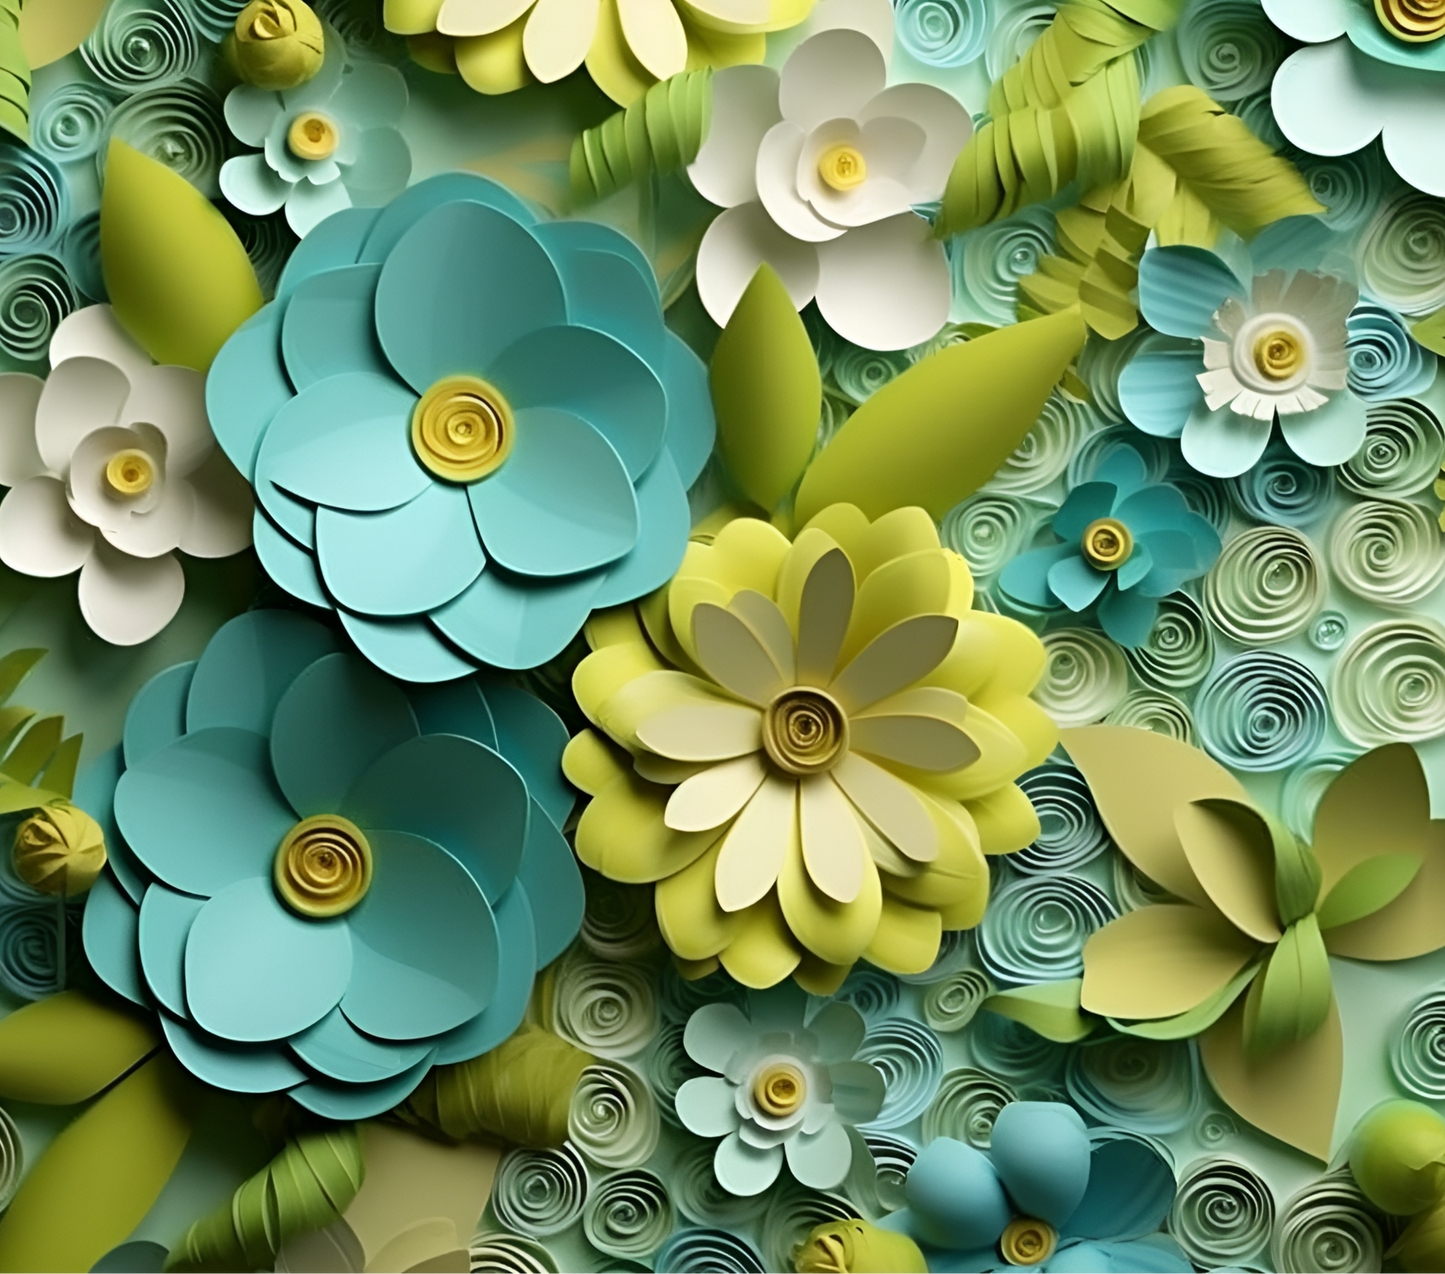 3D YELLOW-GREEN AND BLUE FLORAL